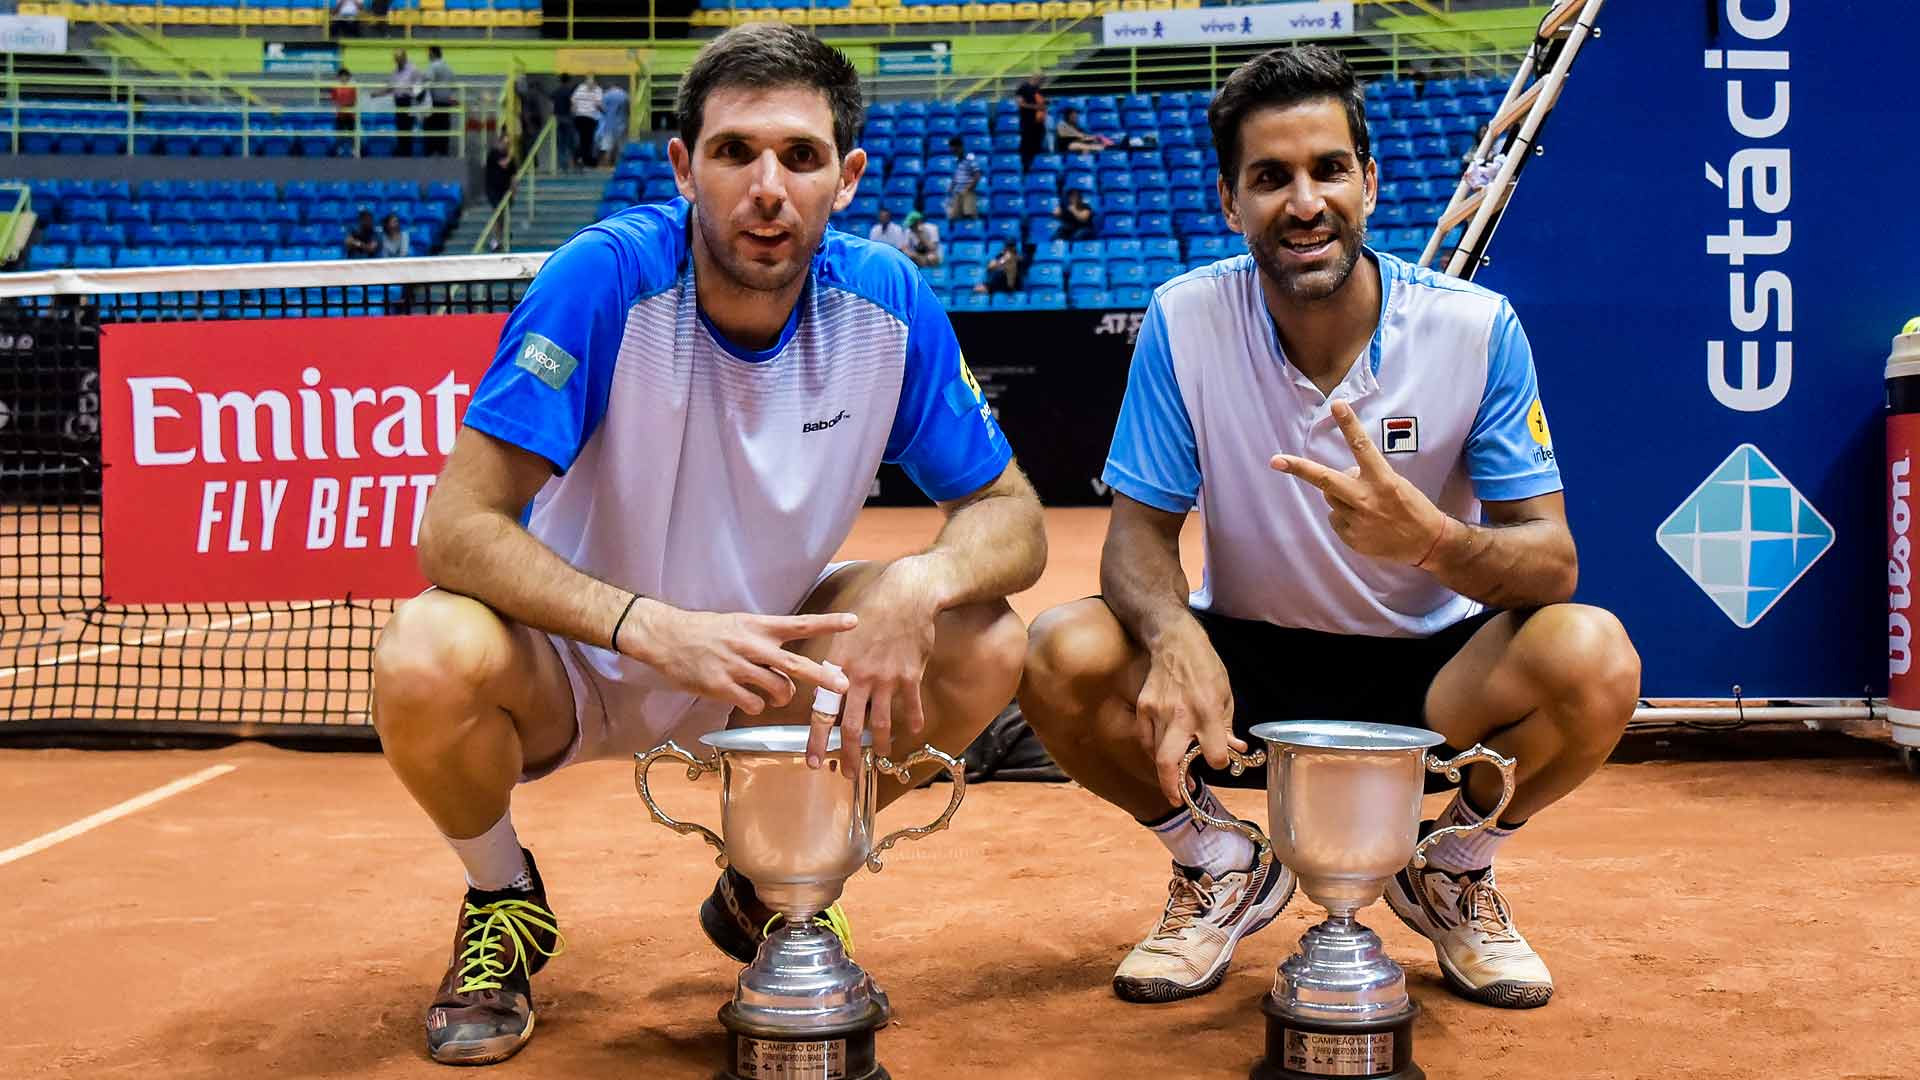 Federico Delbonis and Maximo Gonzalez hold their Brasil Open trophies.